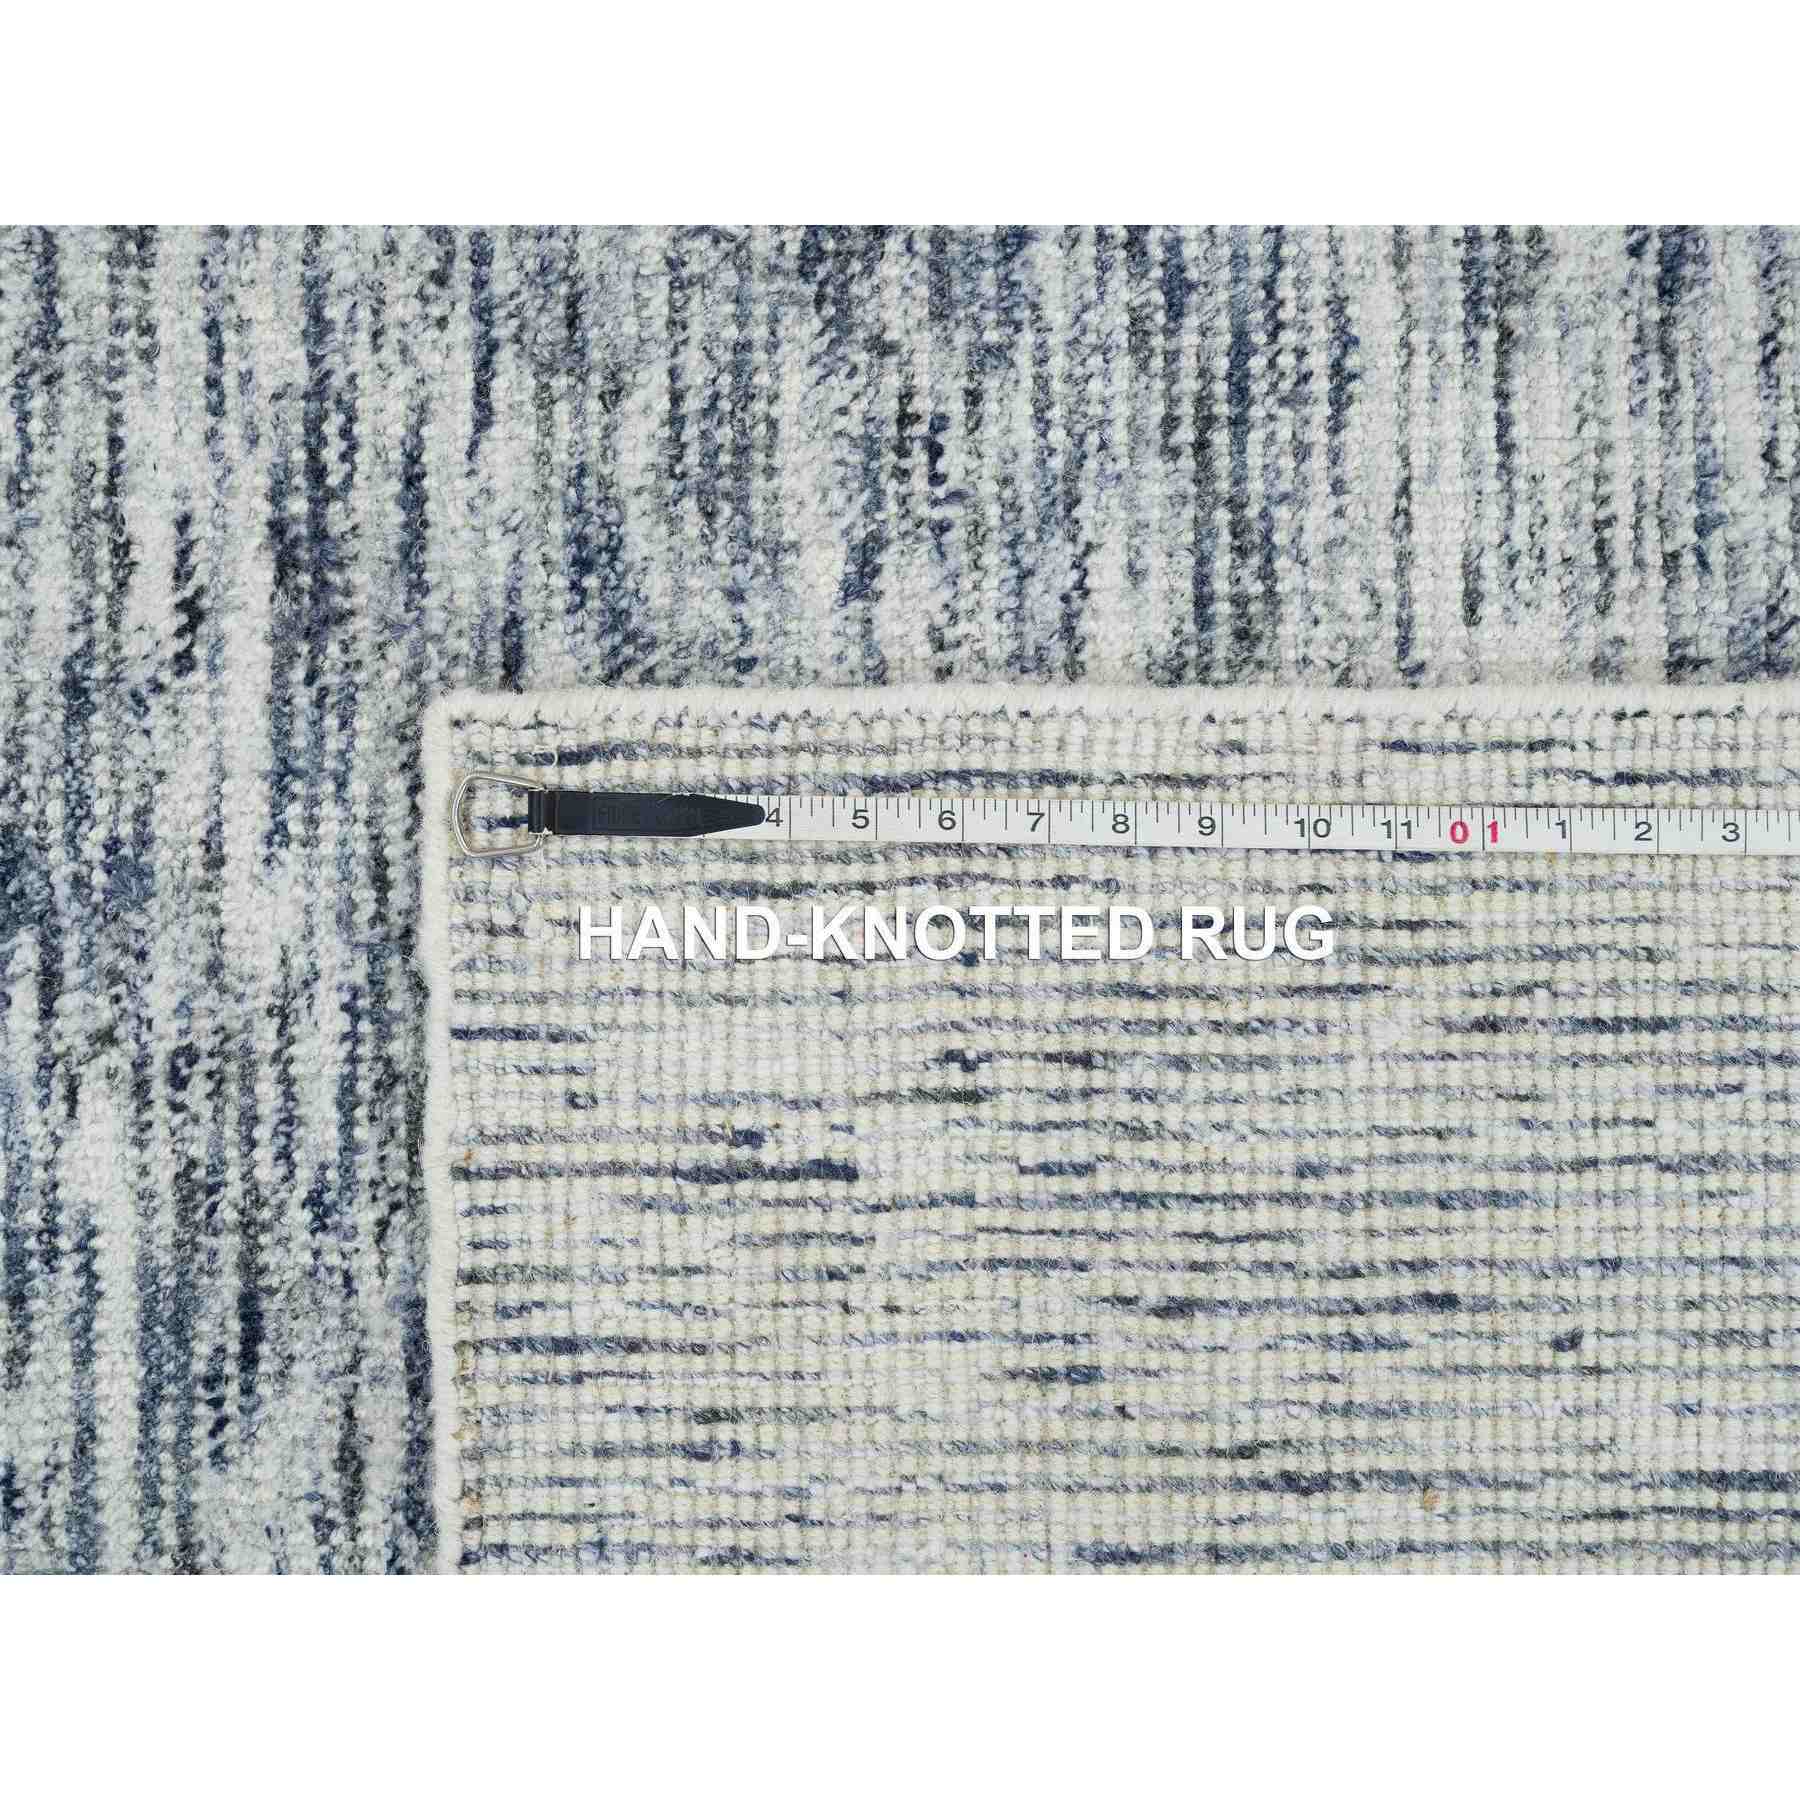 Modern-and-Contemporary-Hand-Loomed-Rug-327185